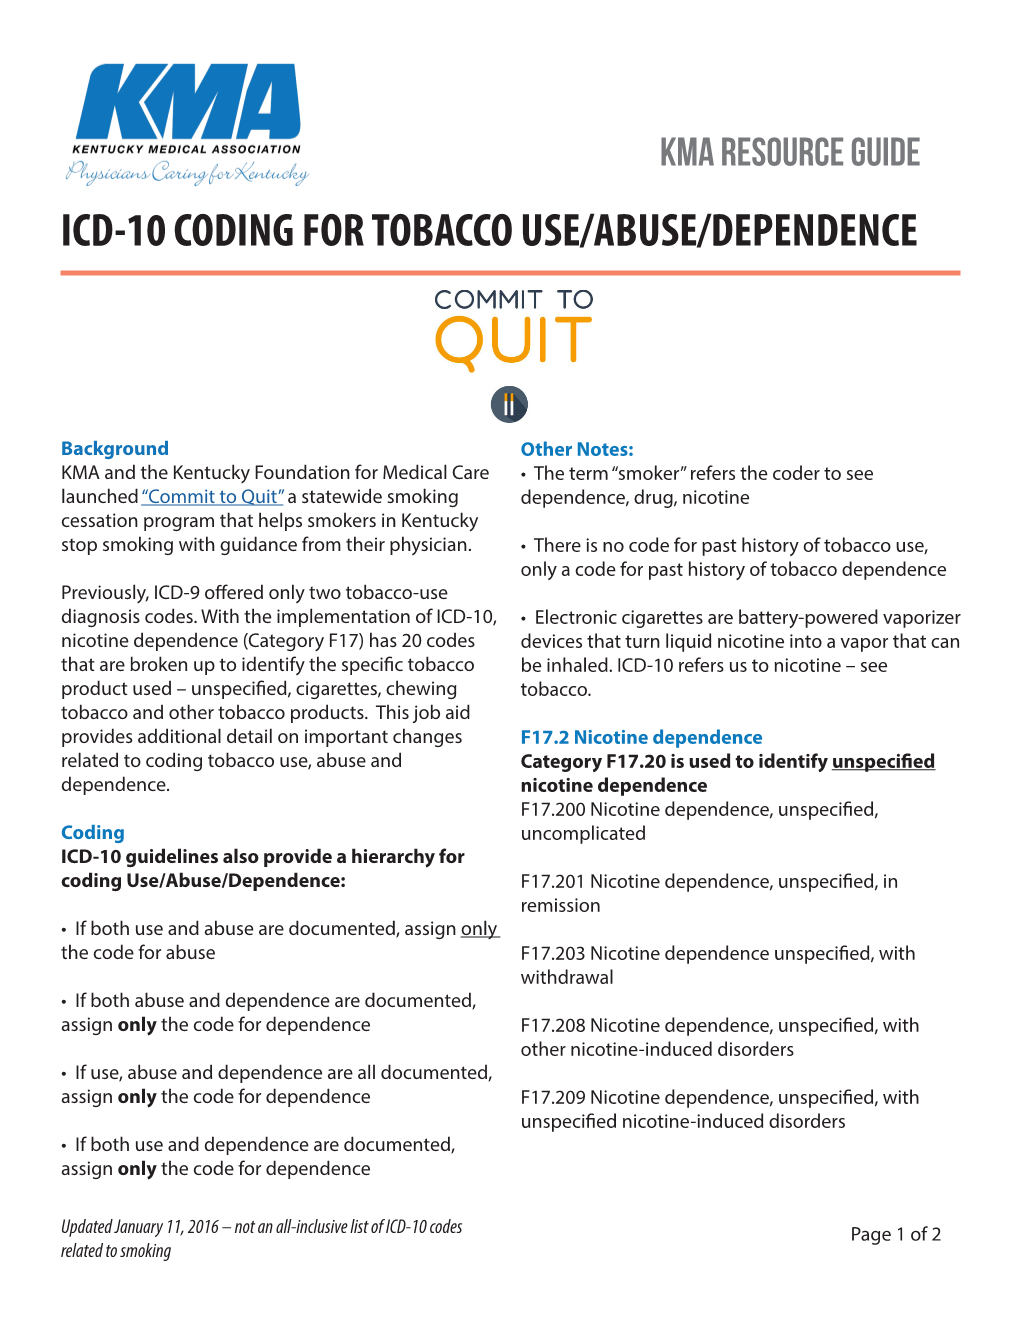 Icd-10 Coding for Tobacco Use/Abuse/Dependence